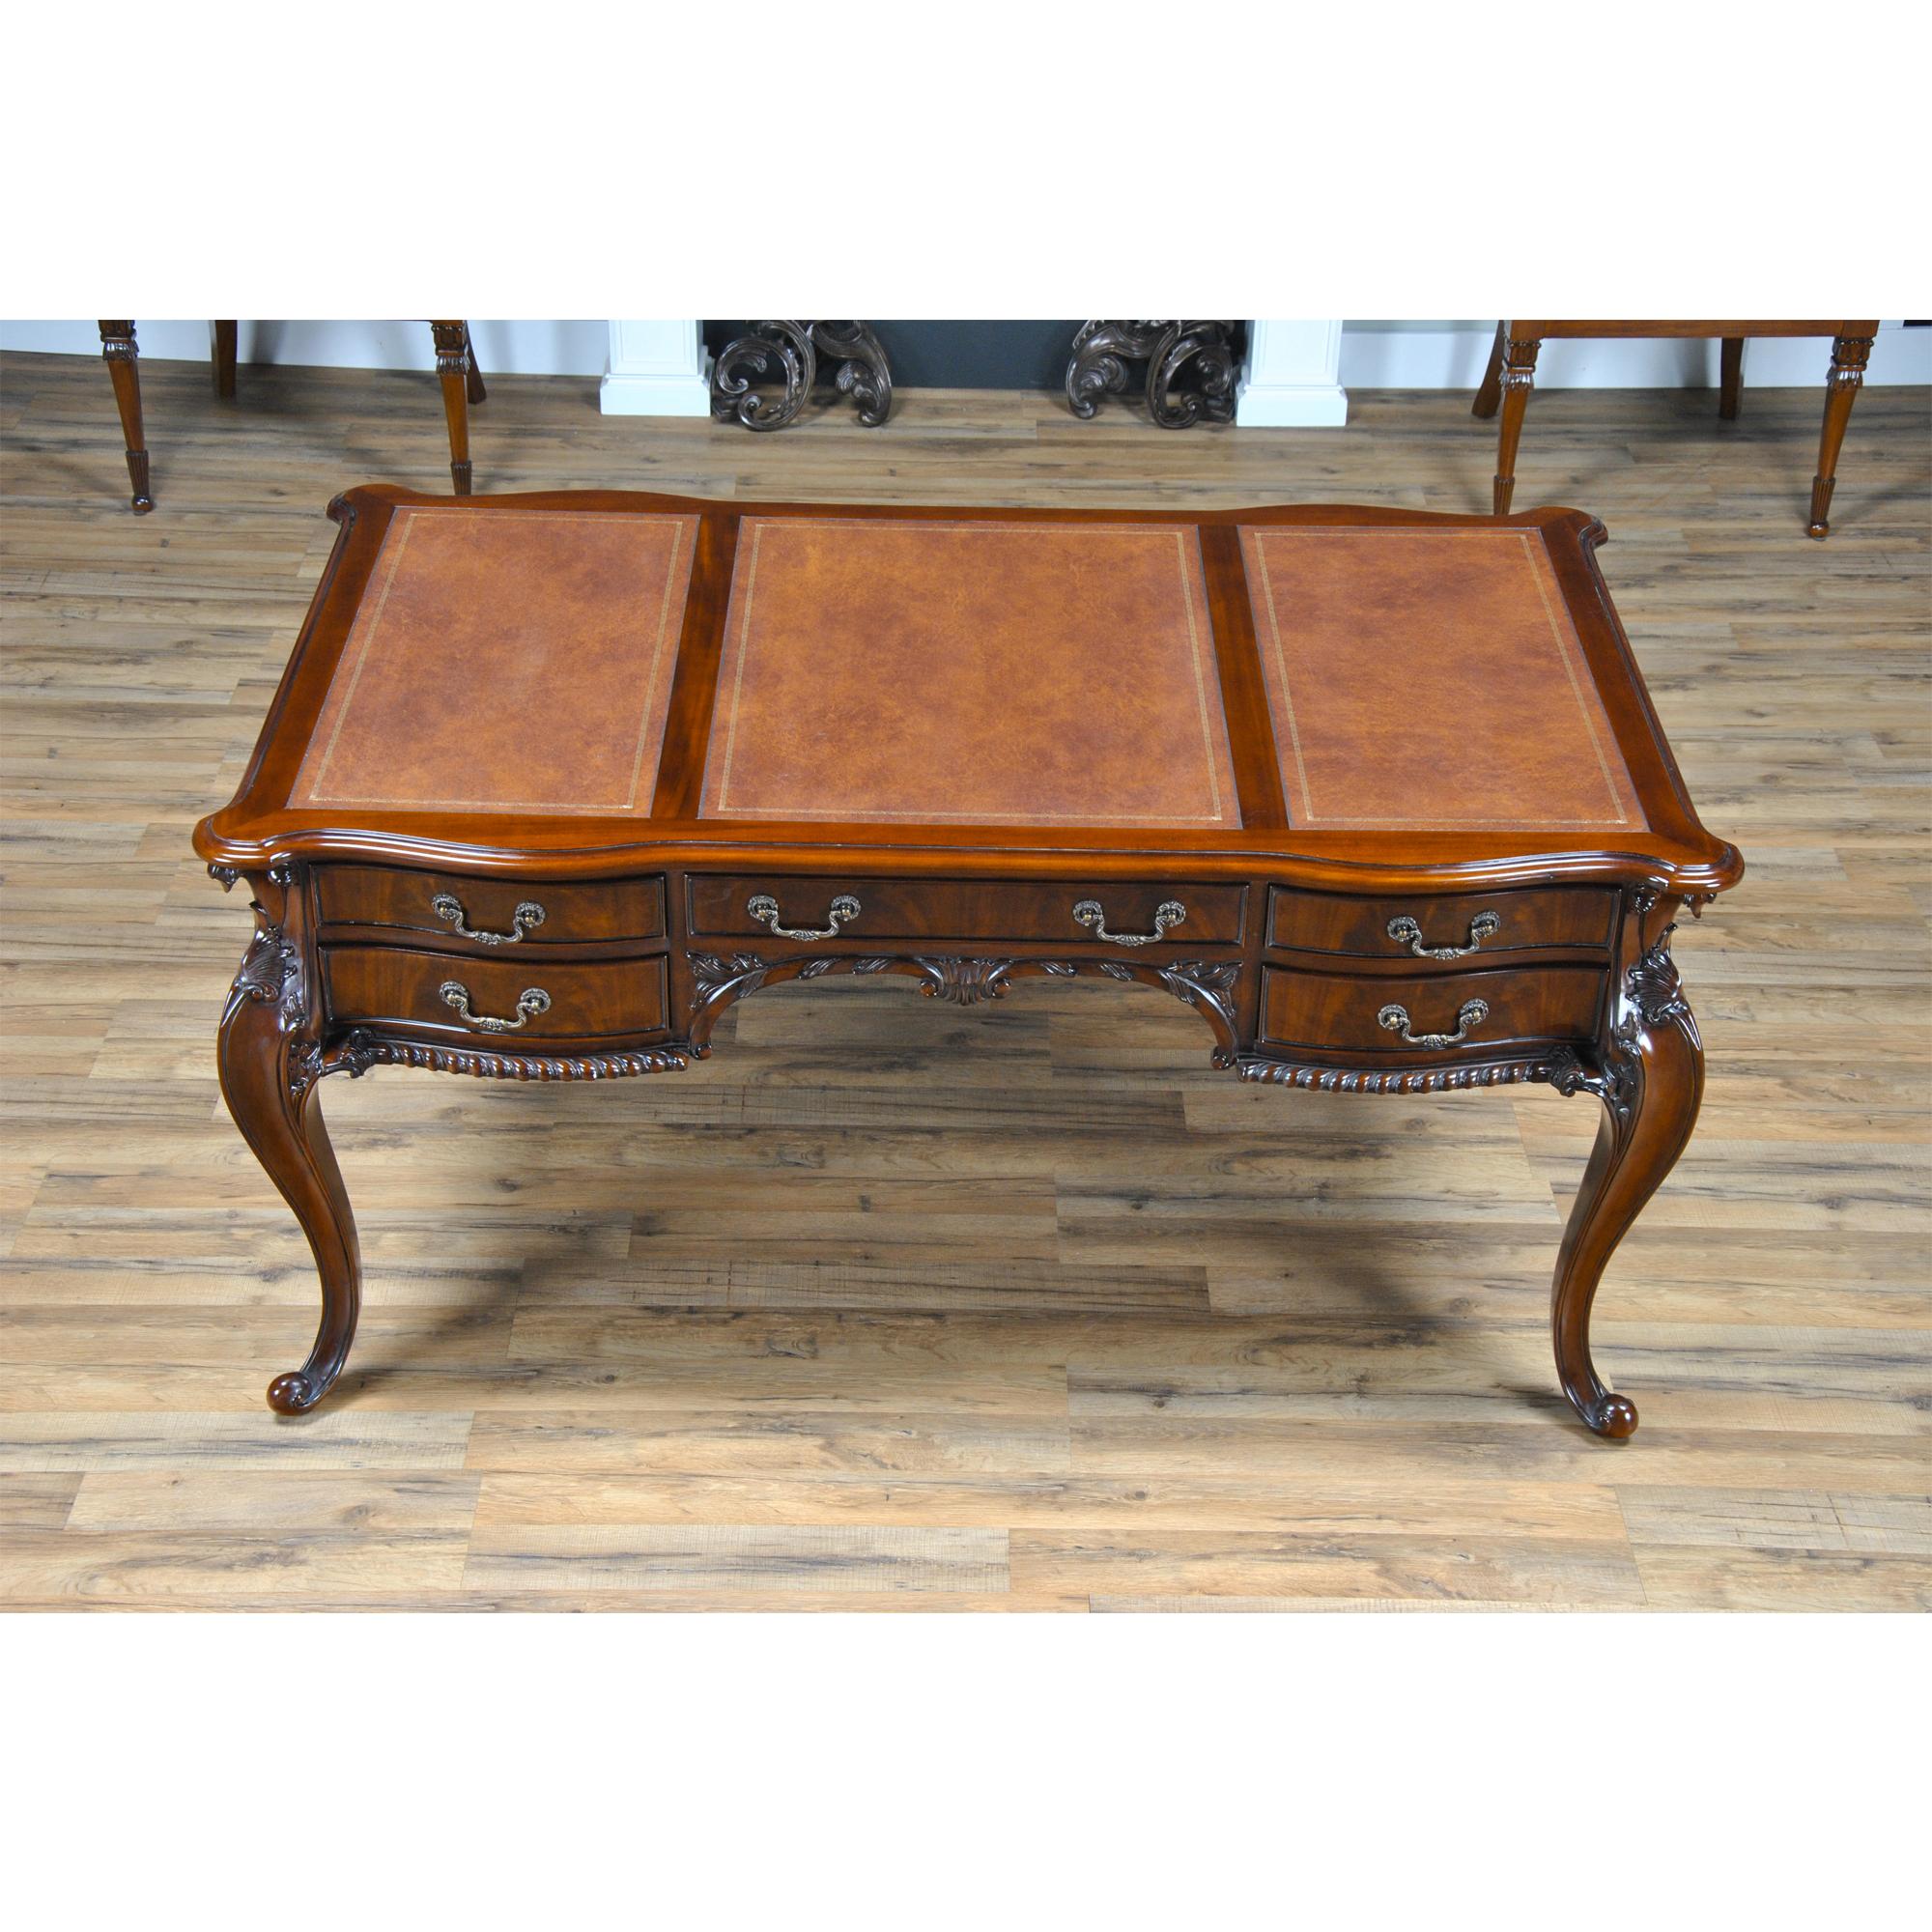 This Chippendale style Mahogany and Leather French Desk is produced by Niagara Furniture. A high quality writing desk that sets the standard for beauty and function among antique reproductions. Constructed from the finest grained mahogany the top